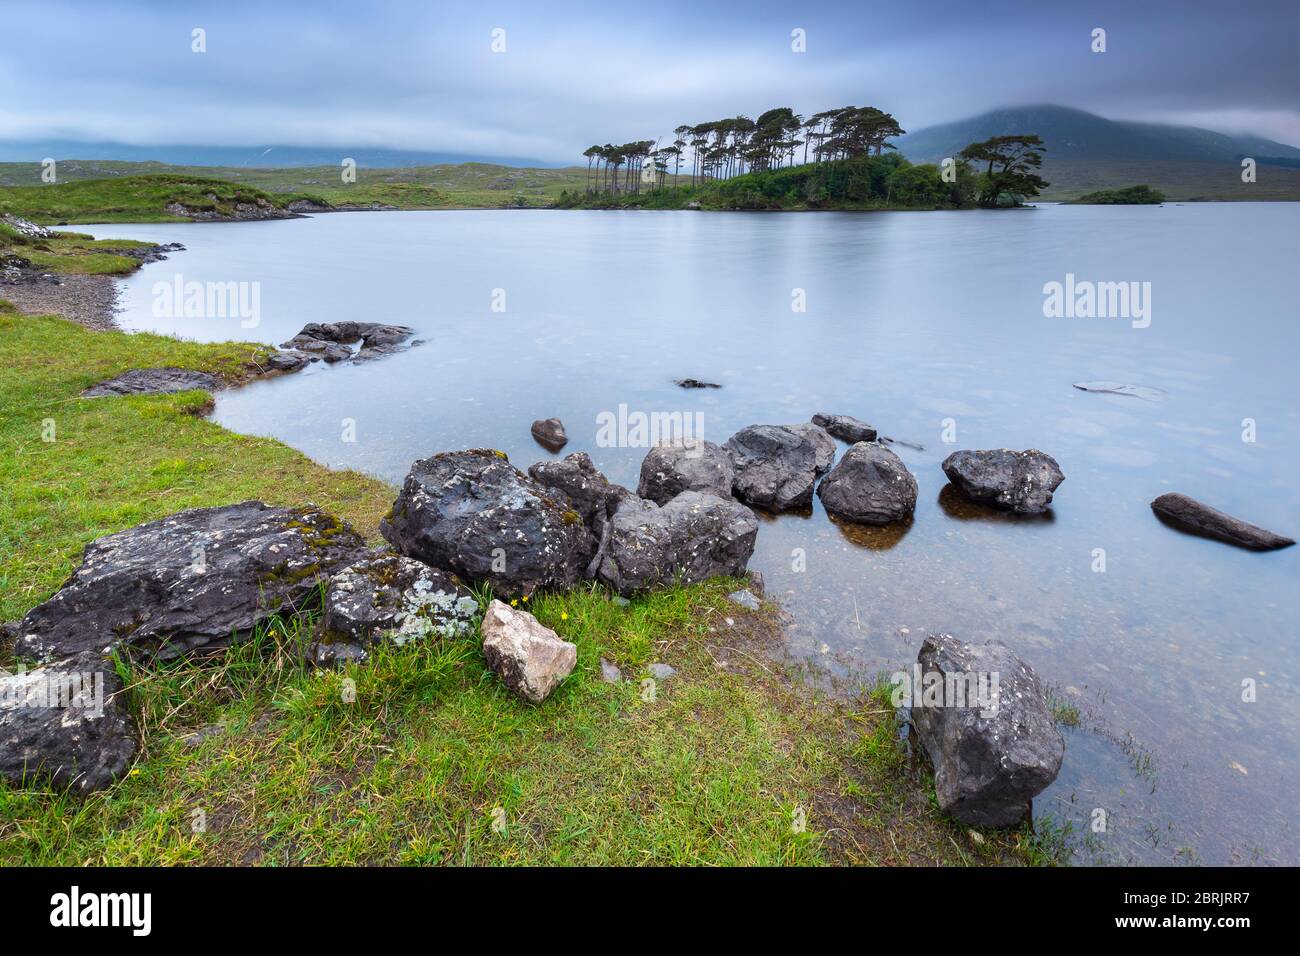 View of Pine Island on the Derryclare Lough. Pine Island, Connemara National Park, County Galway, Connacht province, Inagh Valley, Ireland. Stock Photo